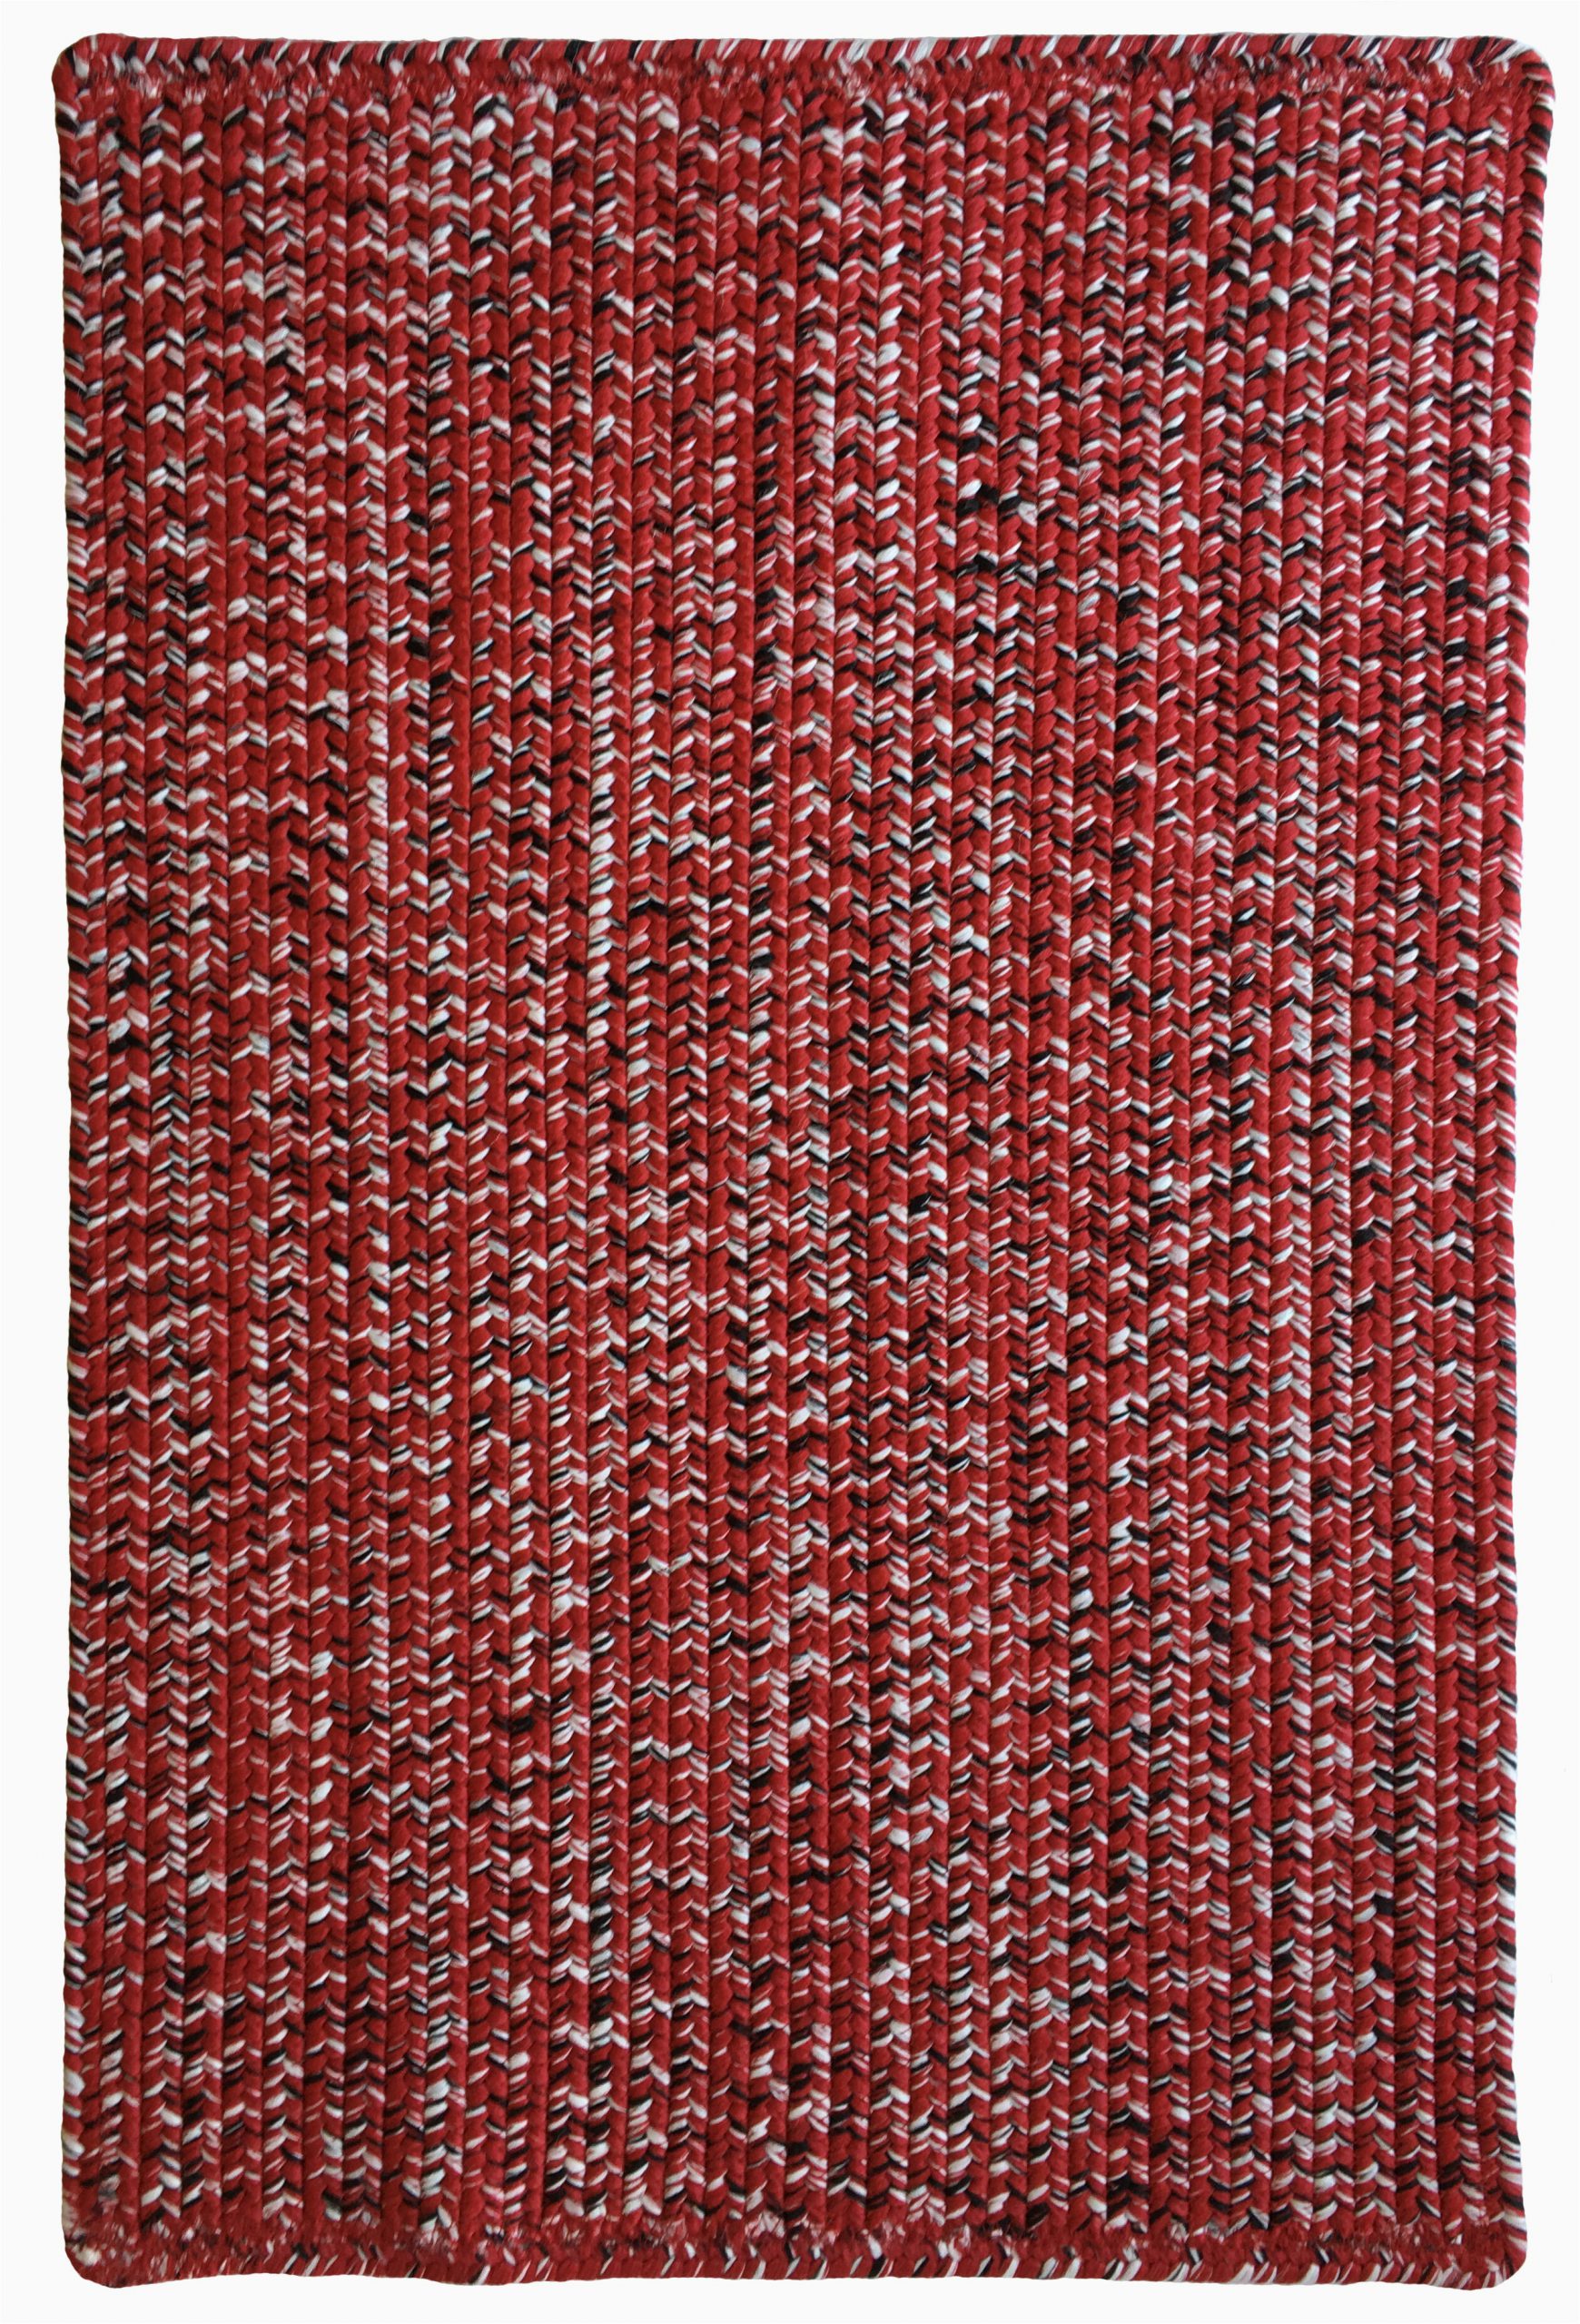 Red White and Blue Braided Rugs Aarush Hand Braided Red area Rug